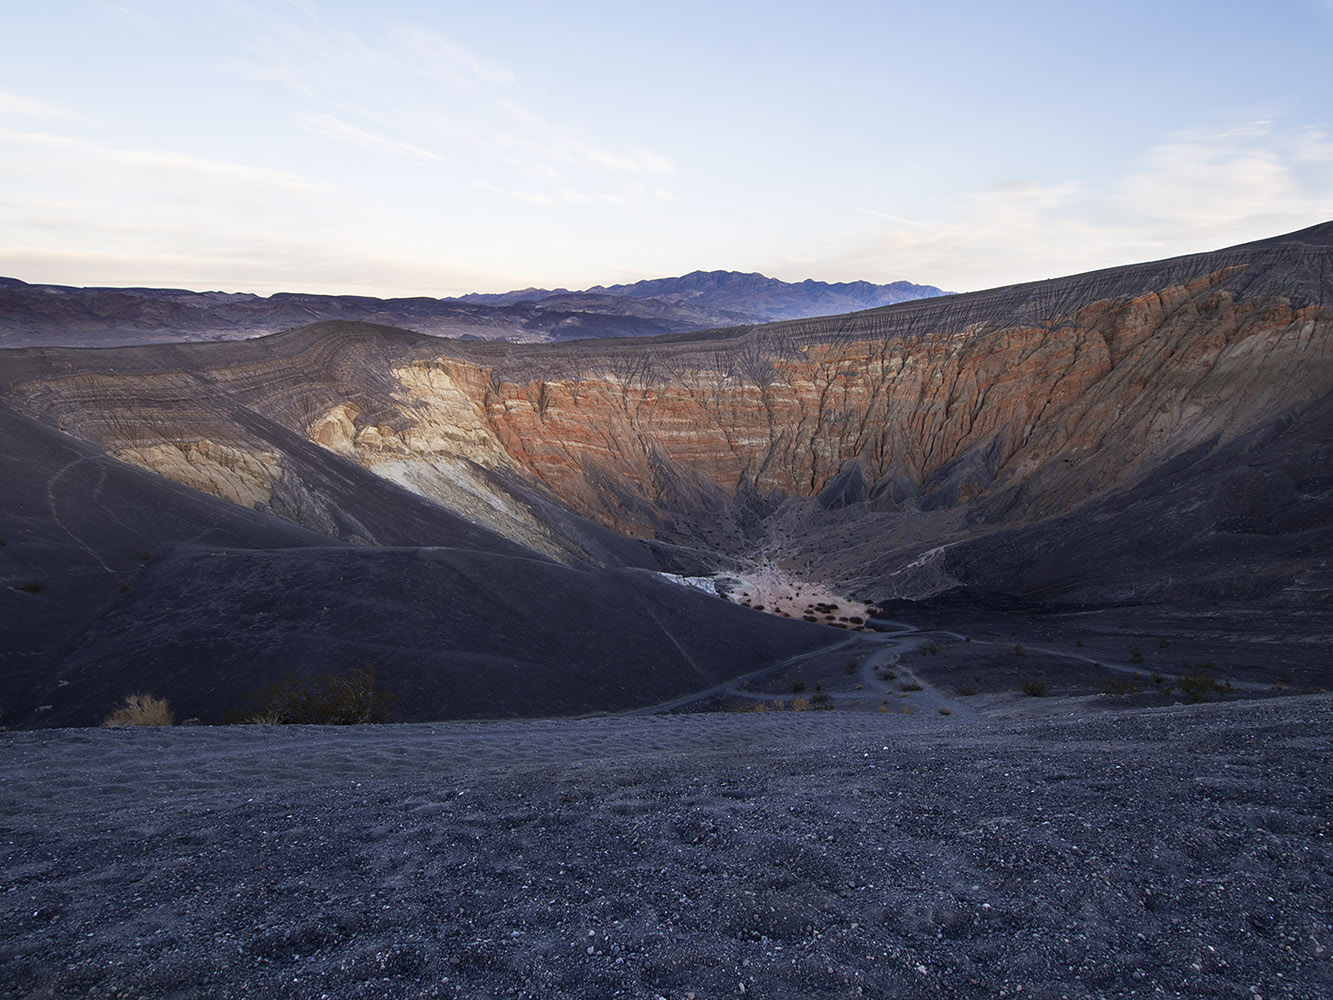 Ubehebe volcanic crater after sunset.